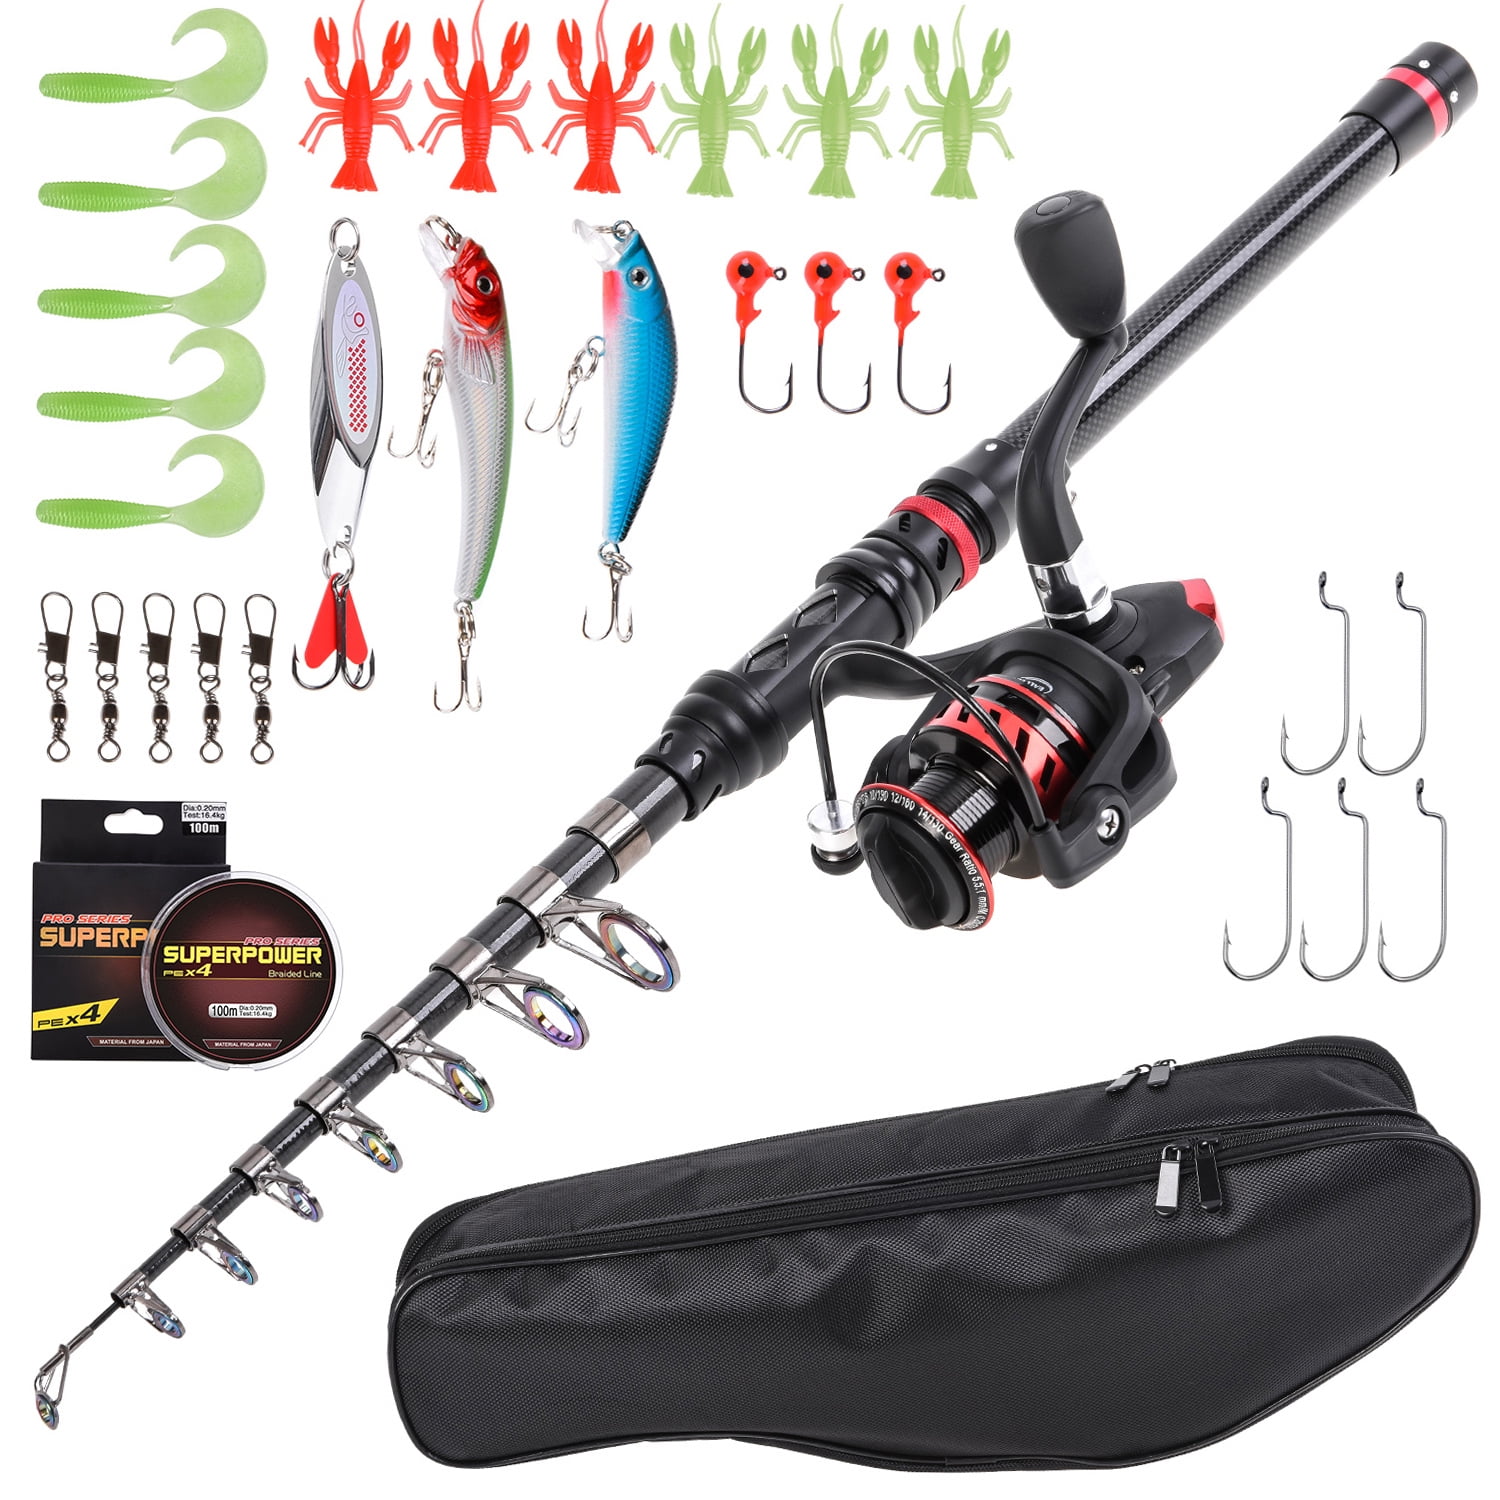 Outdoor Portable Fishing Rod Fishing Rod Kit, Carbon Fiber Retractable  Fishing Rod And Reel Combo With Line, Bionic Lure, Hook And Carry Bag,  Fishing